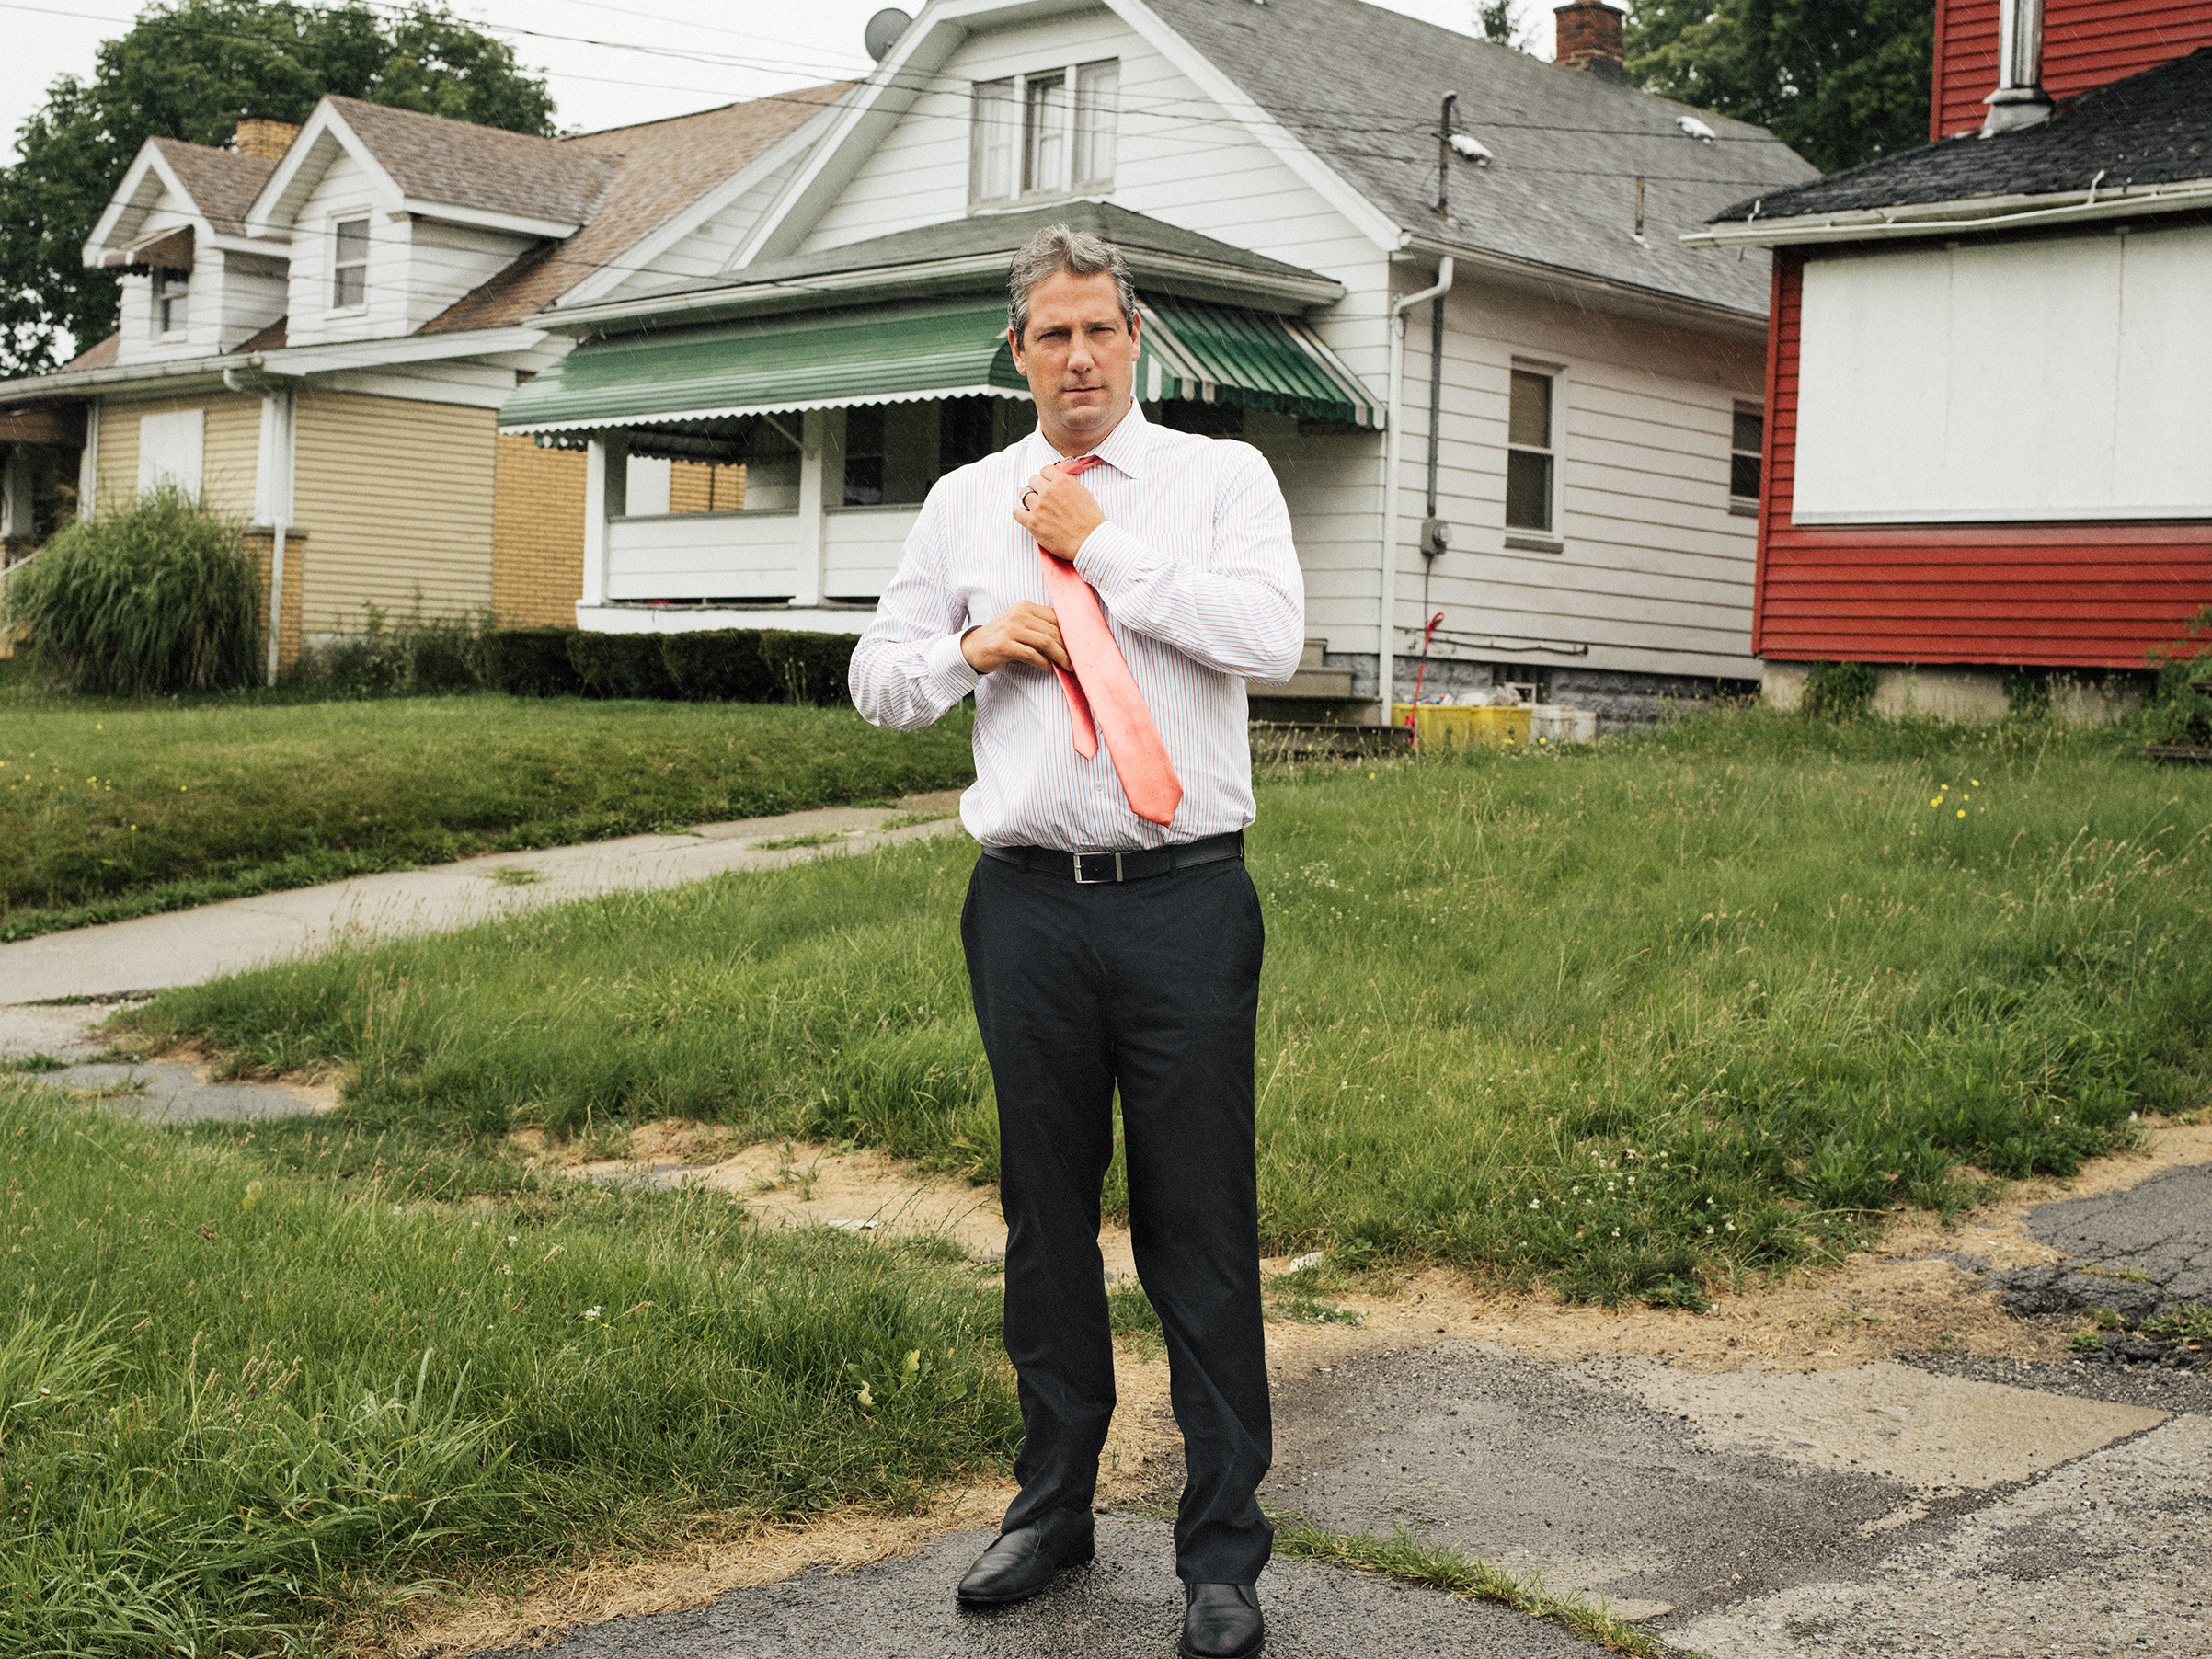 Democratic Congressman Tim Ryan visits a neighborhood in Youngstown, Ohio, on July 22 (Mark Hartman for TIME)